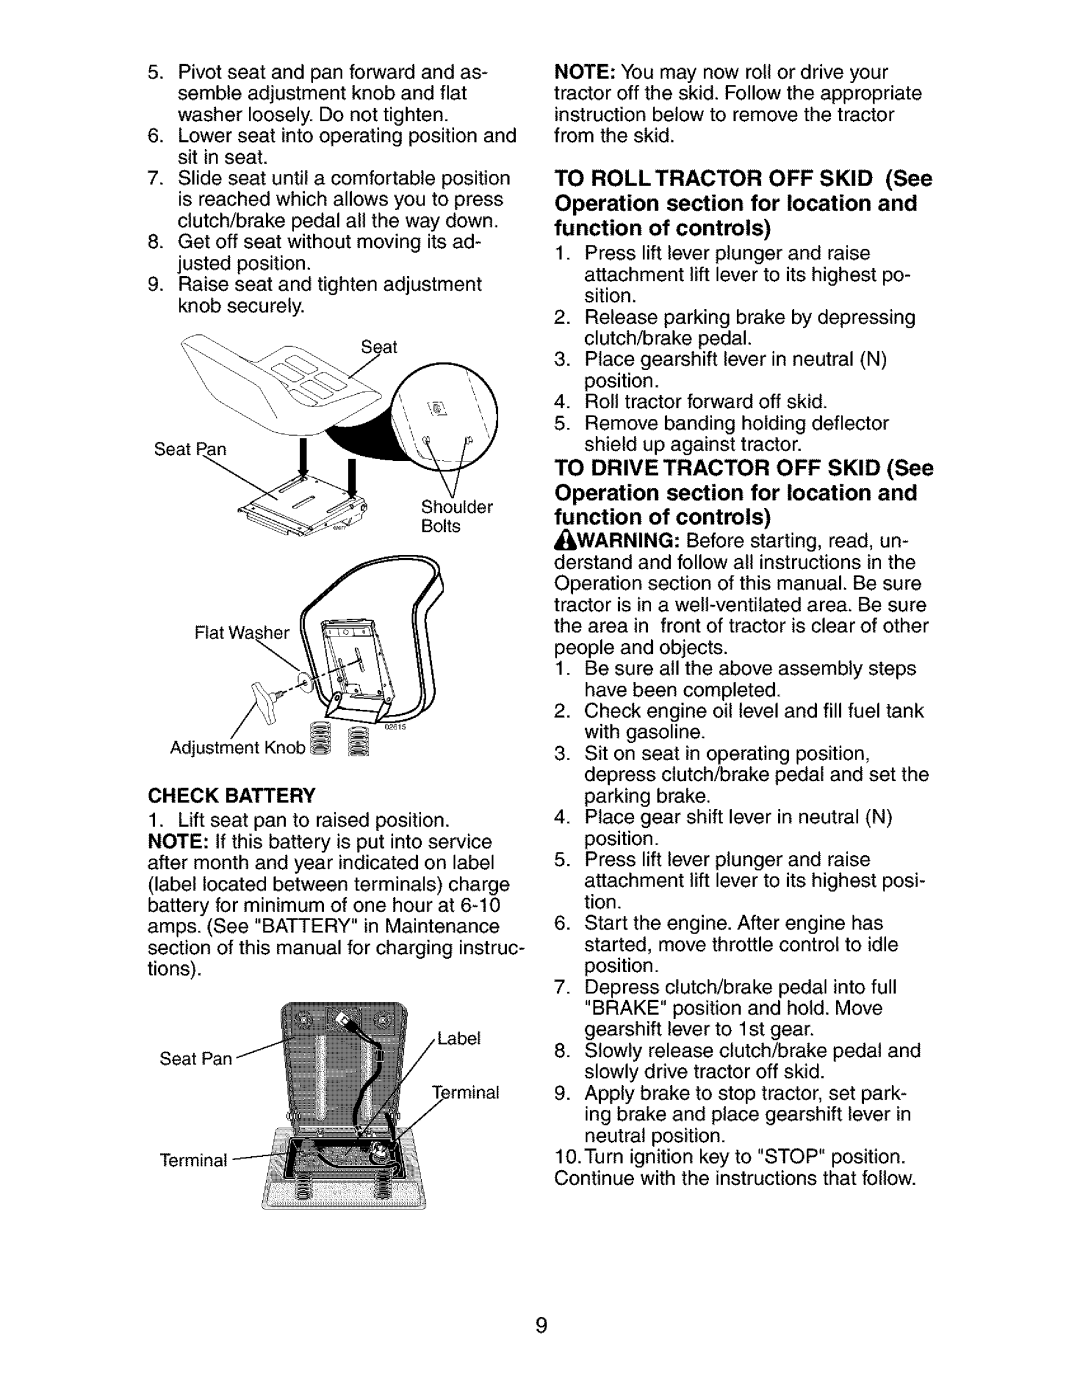 Craftsman 917.273134 owner manual Lowerseatinto operatingposition and sit in seat 